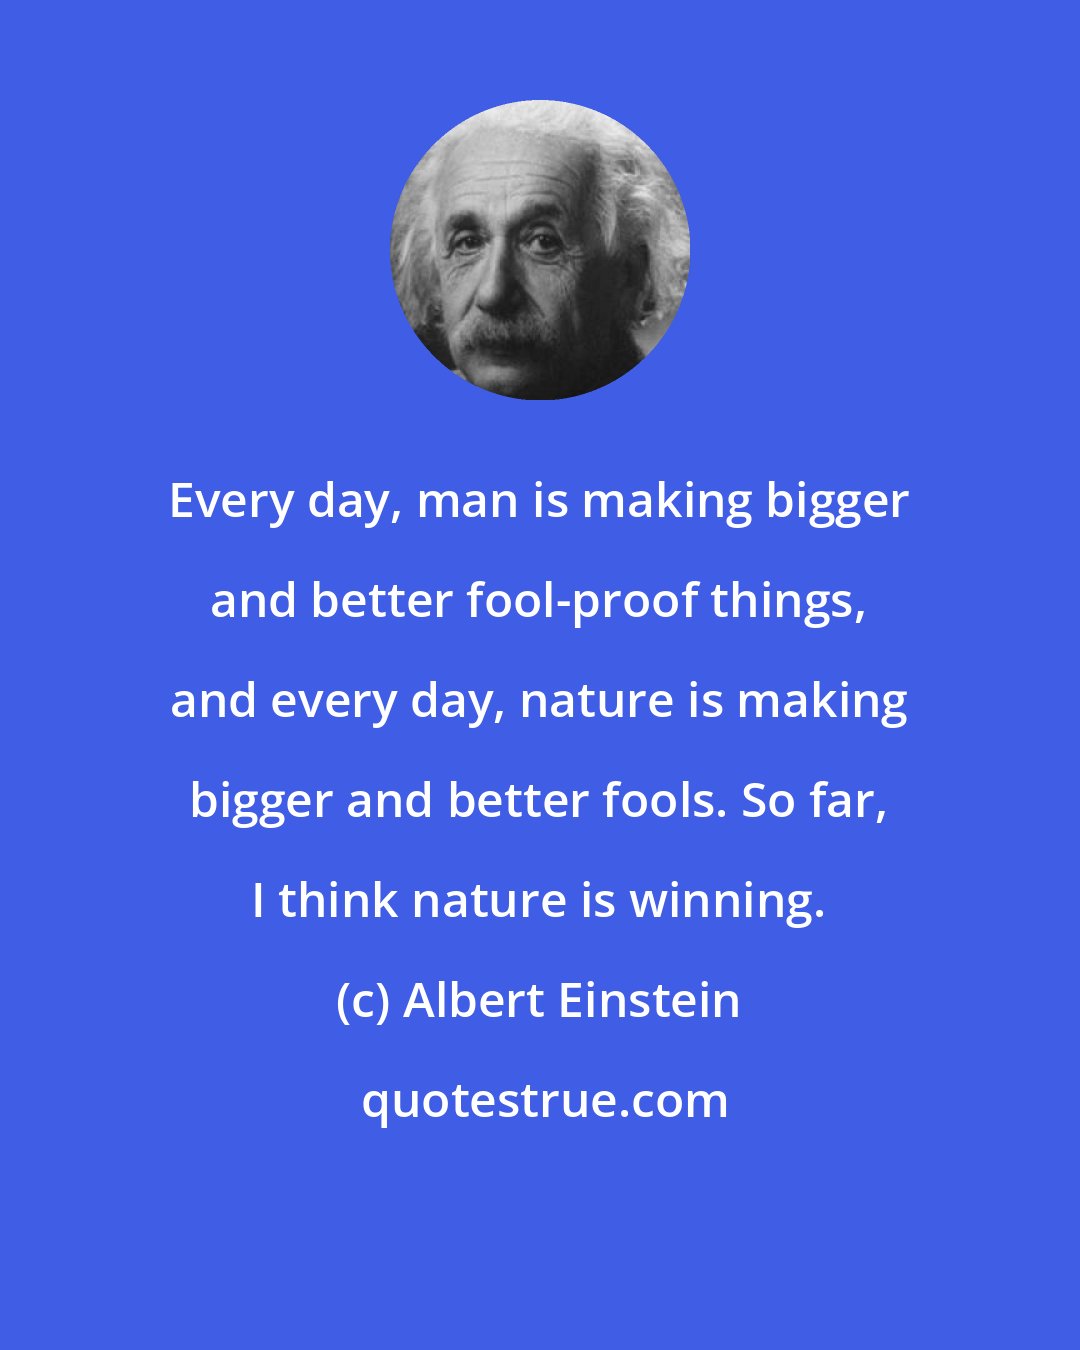 Albert Einstein: Every day, man is making bigger and better fool-proof things, and every day, nature is making bigger and better fools. So far, I think nature is winning.